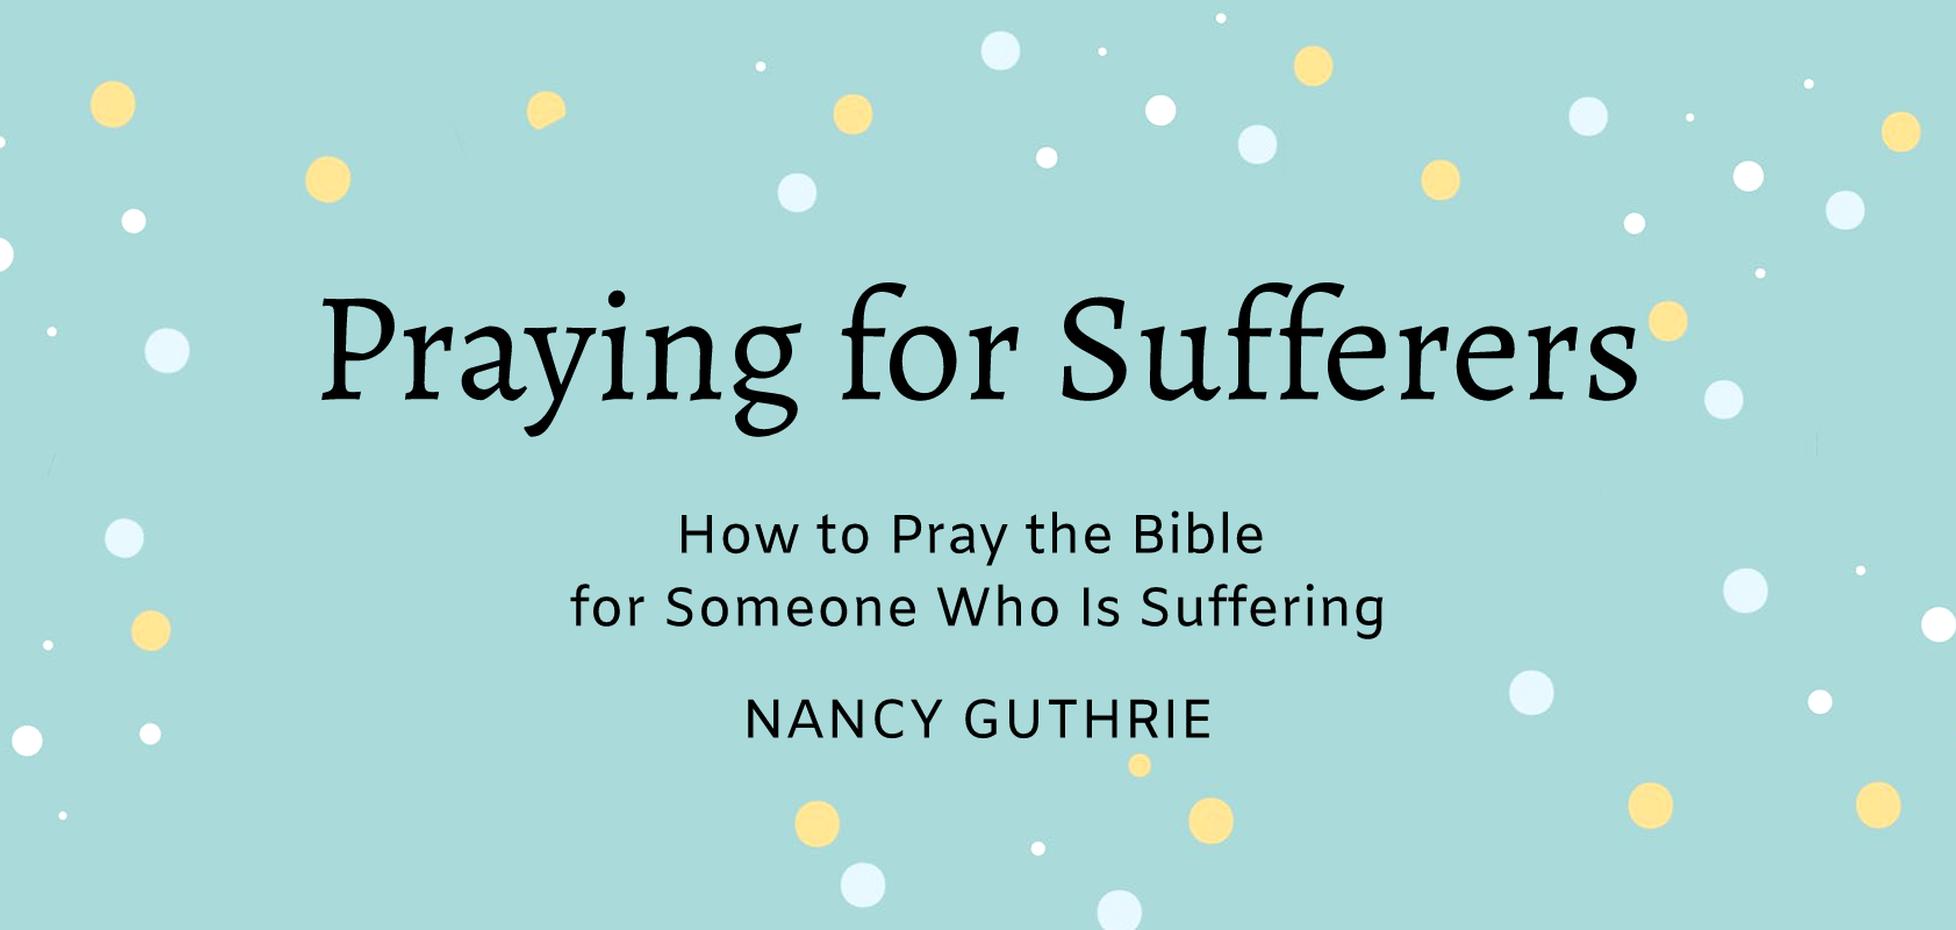 Praying for Sufferers